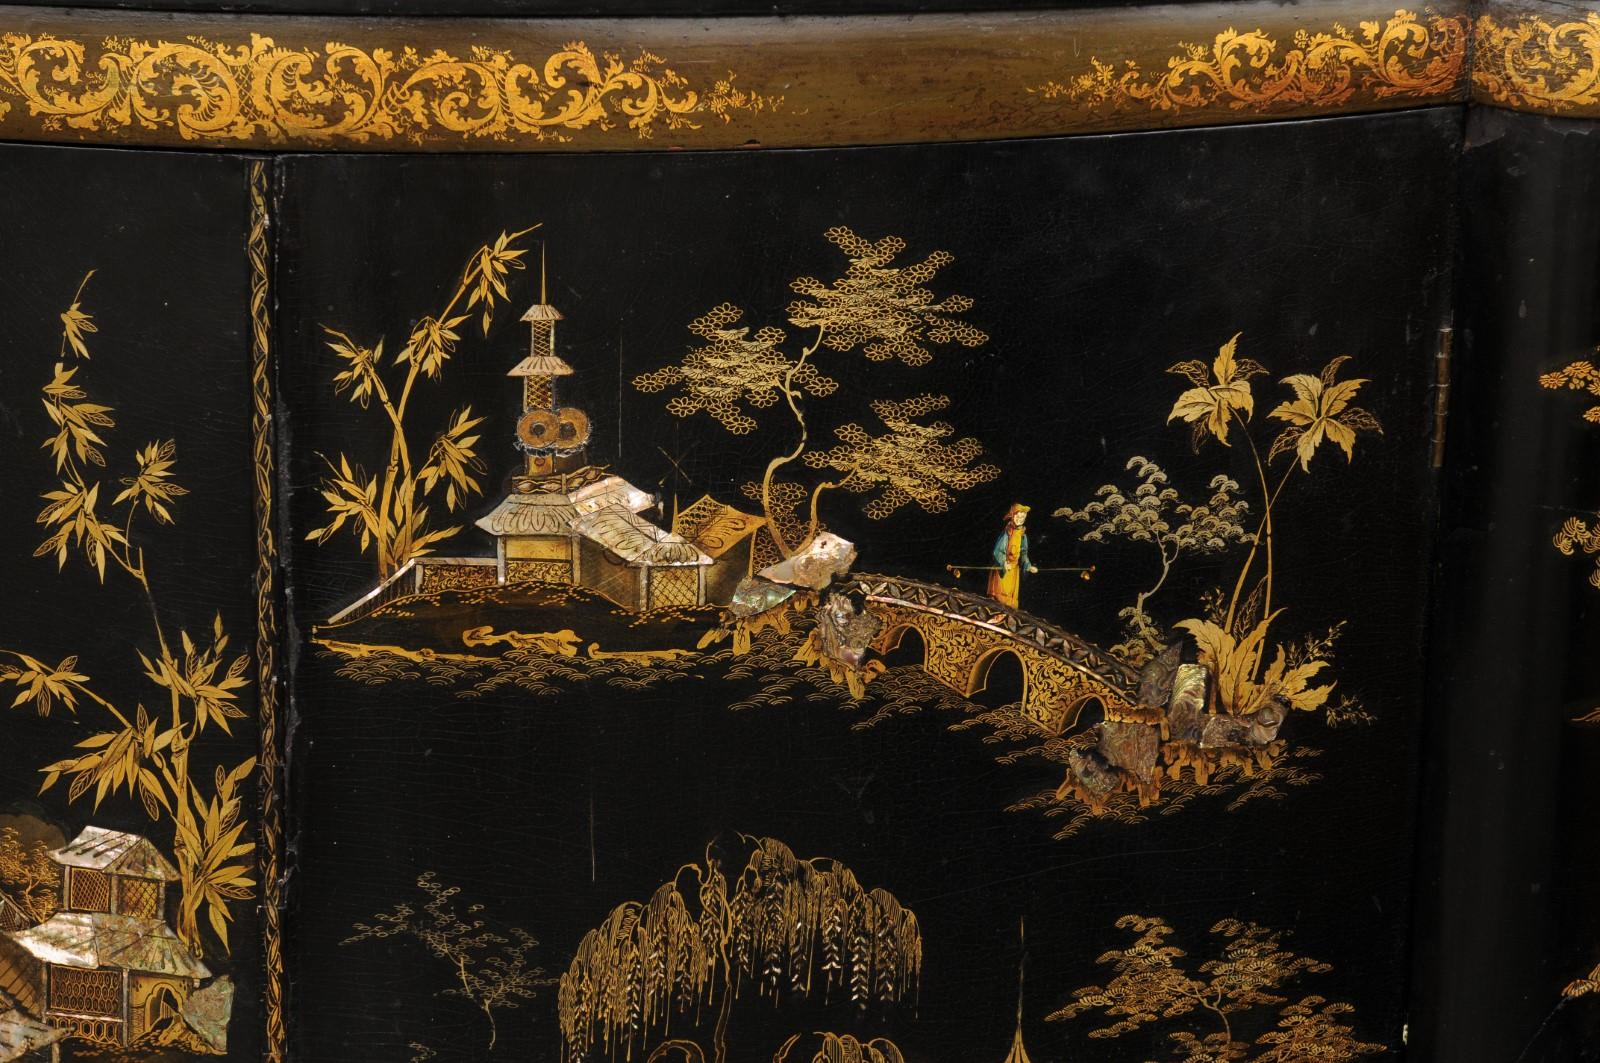 An English black lacquered narrow two-door credenza from the late 19th century, with gilt chinoiserie décor and serpentine side panels. Born in England during the later years of the 19th century, this exquisite credenza features a black top,